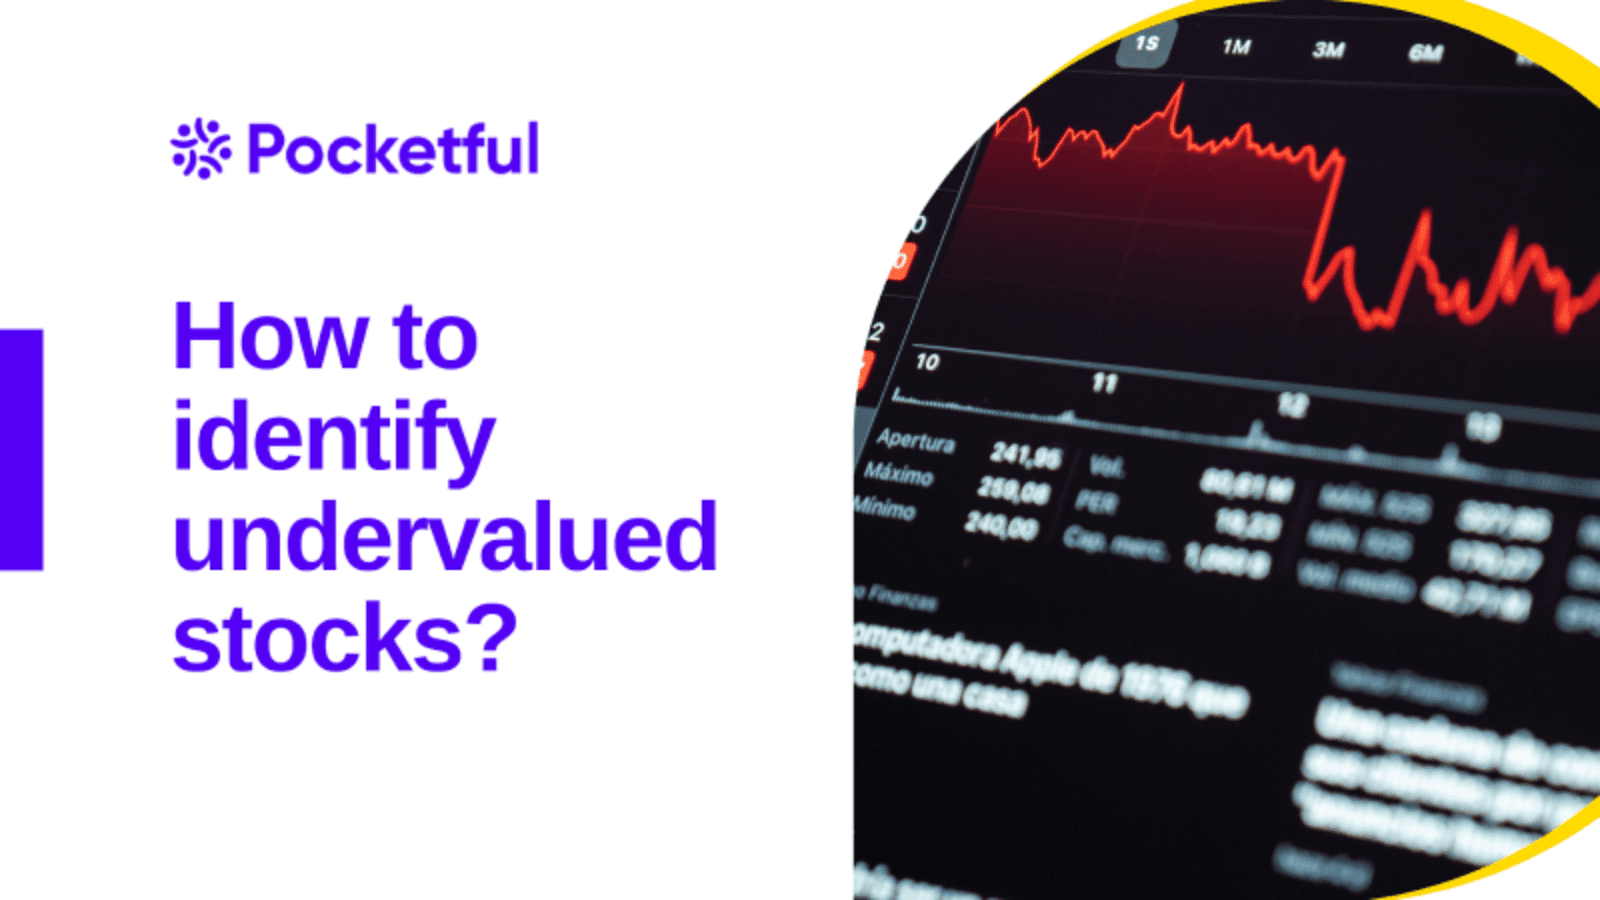 How to find and identify undervalued stocks